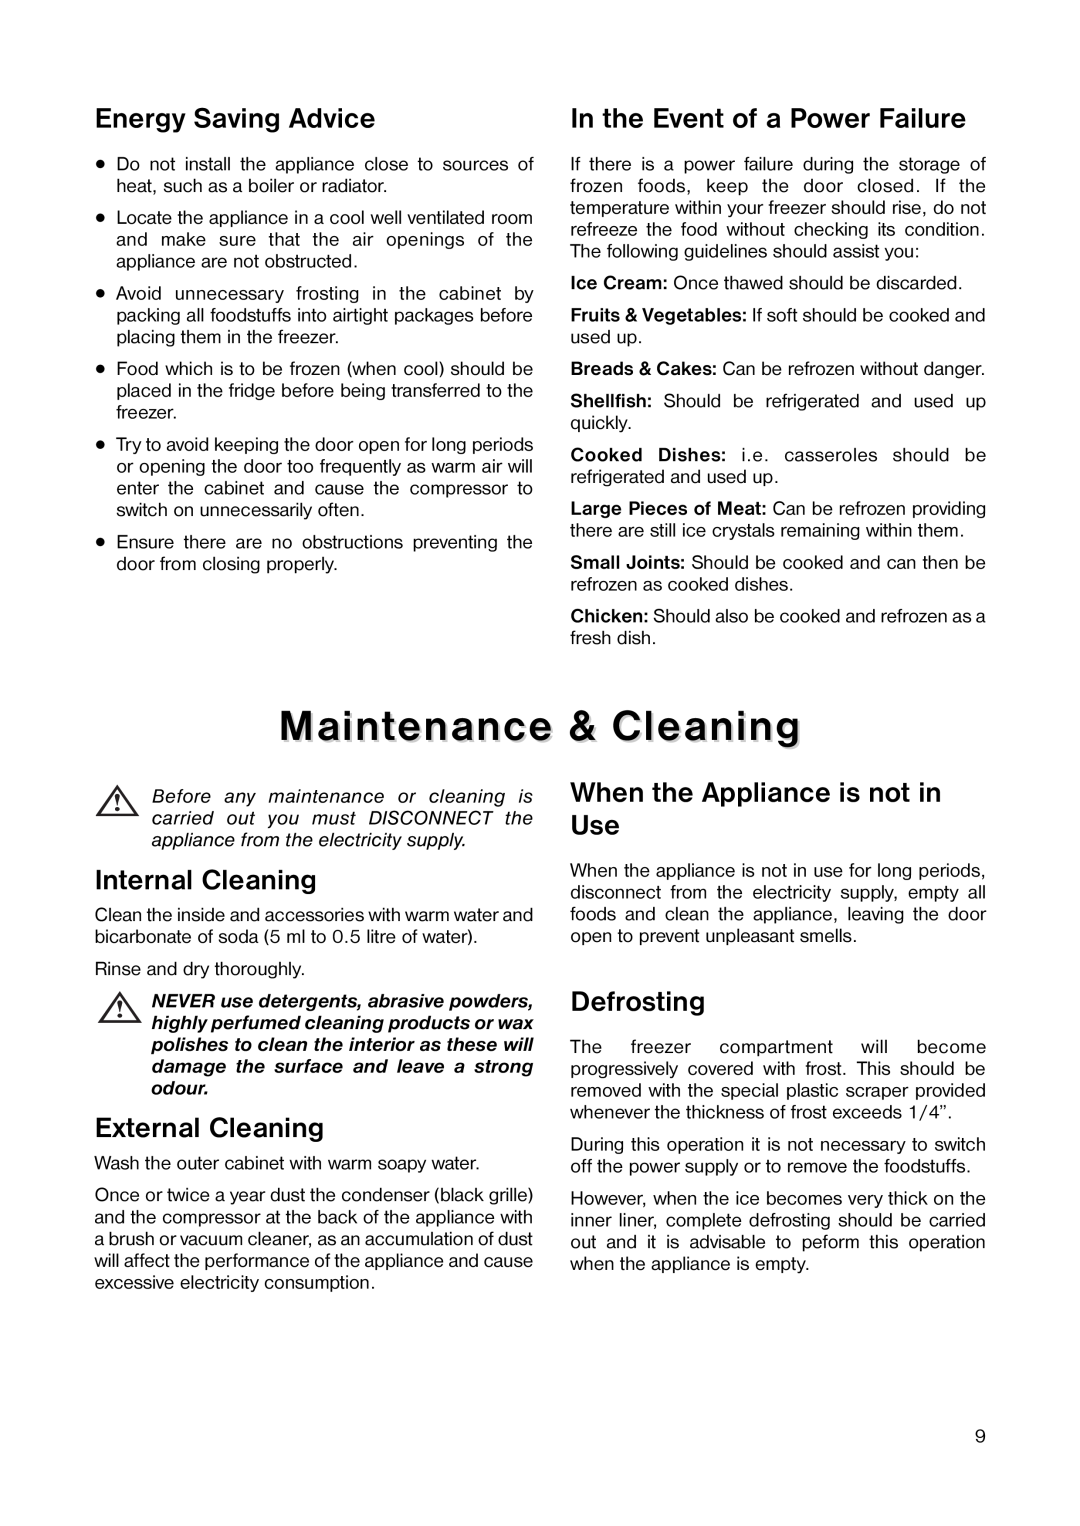 Zanussi ZCUF 41 manual Maintenance & Cleaning, Energy Saving Advice, In the Event of a Power Failure, Internal Cleaning 